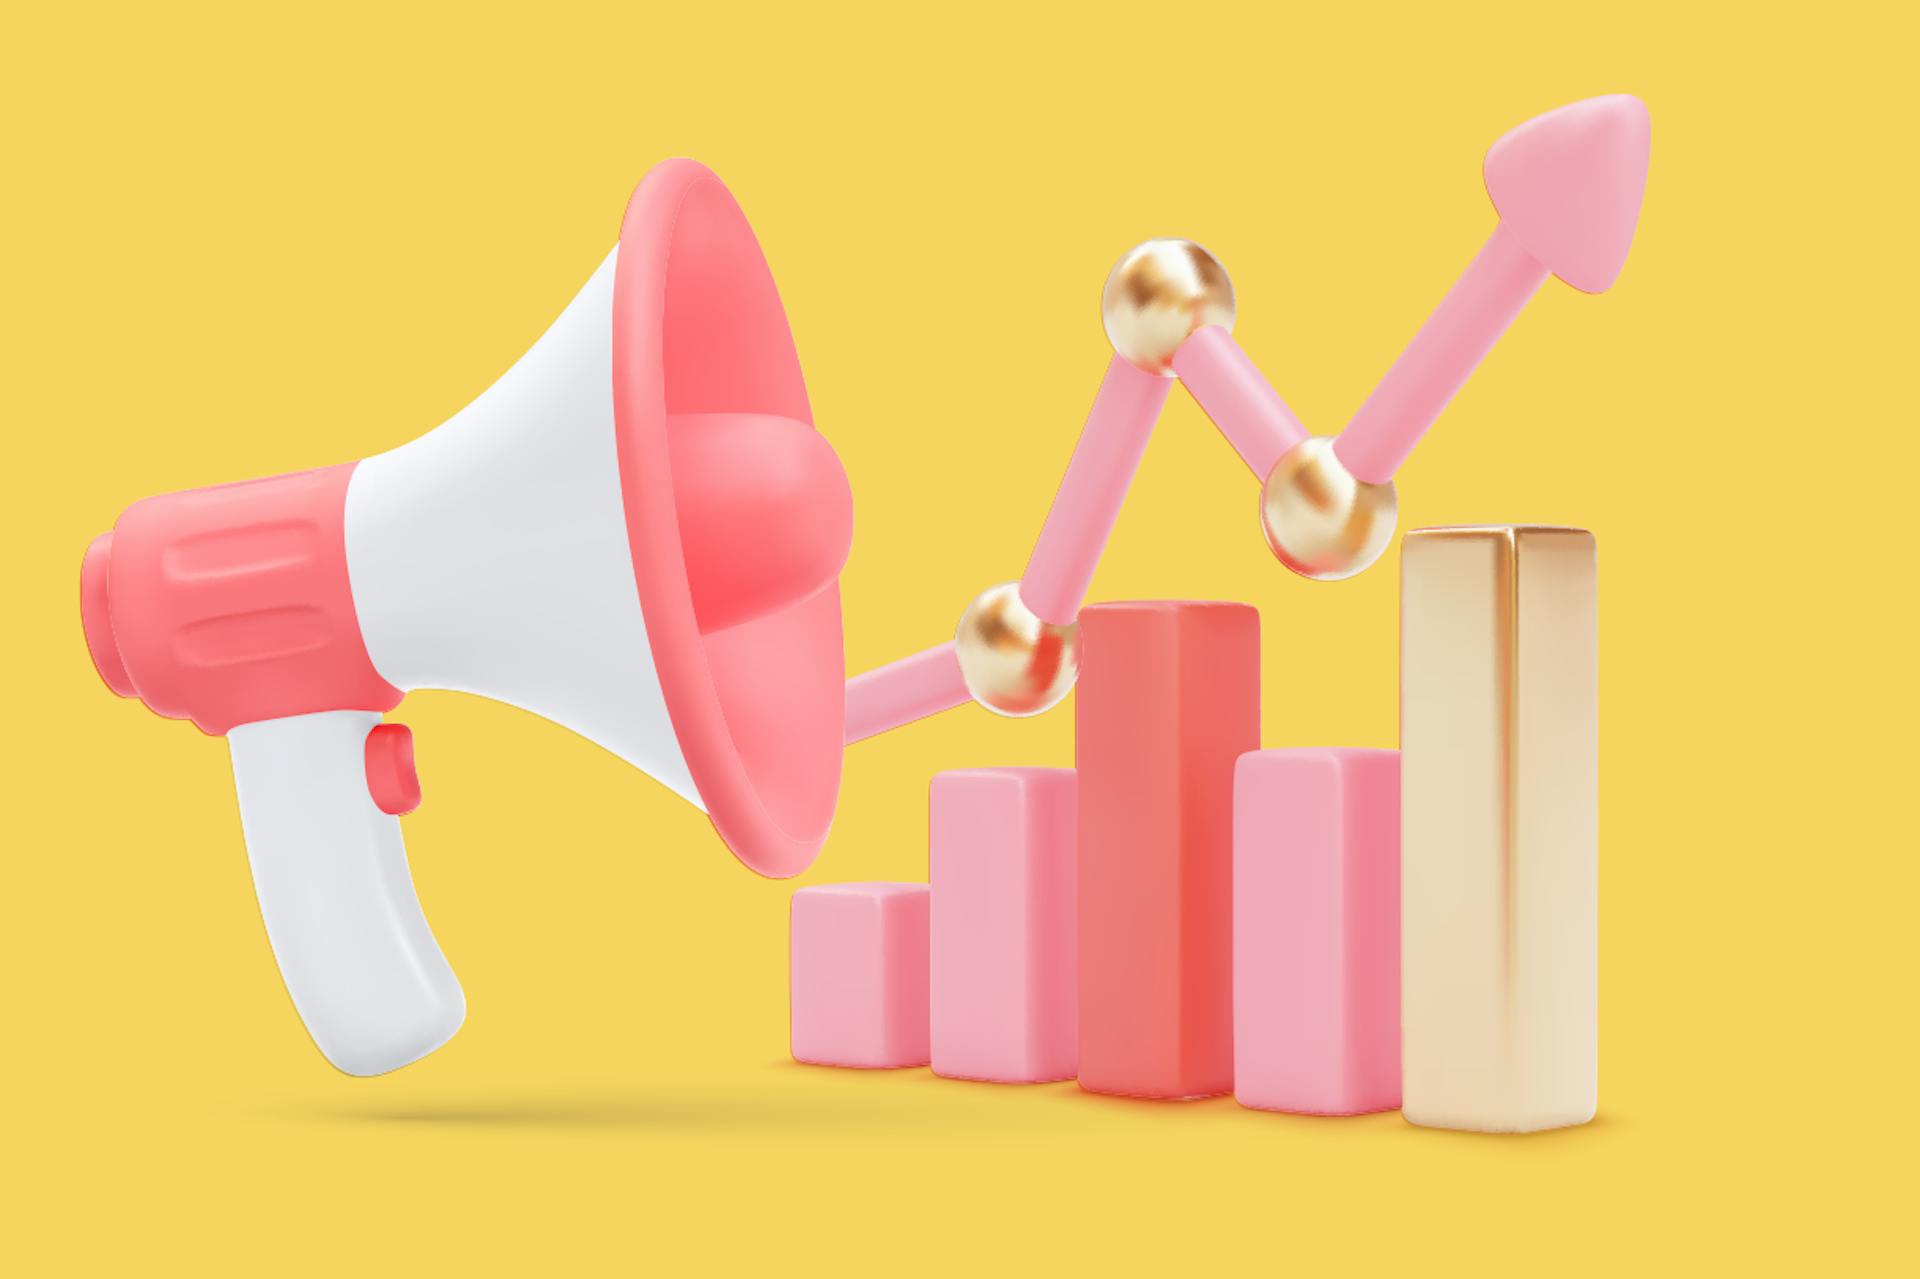 Image showing a pink and white megaphone next to a bar chart and arrow going up and to the right, on a bright yellow background. Blog post detailing the different between pr and marketing.